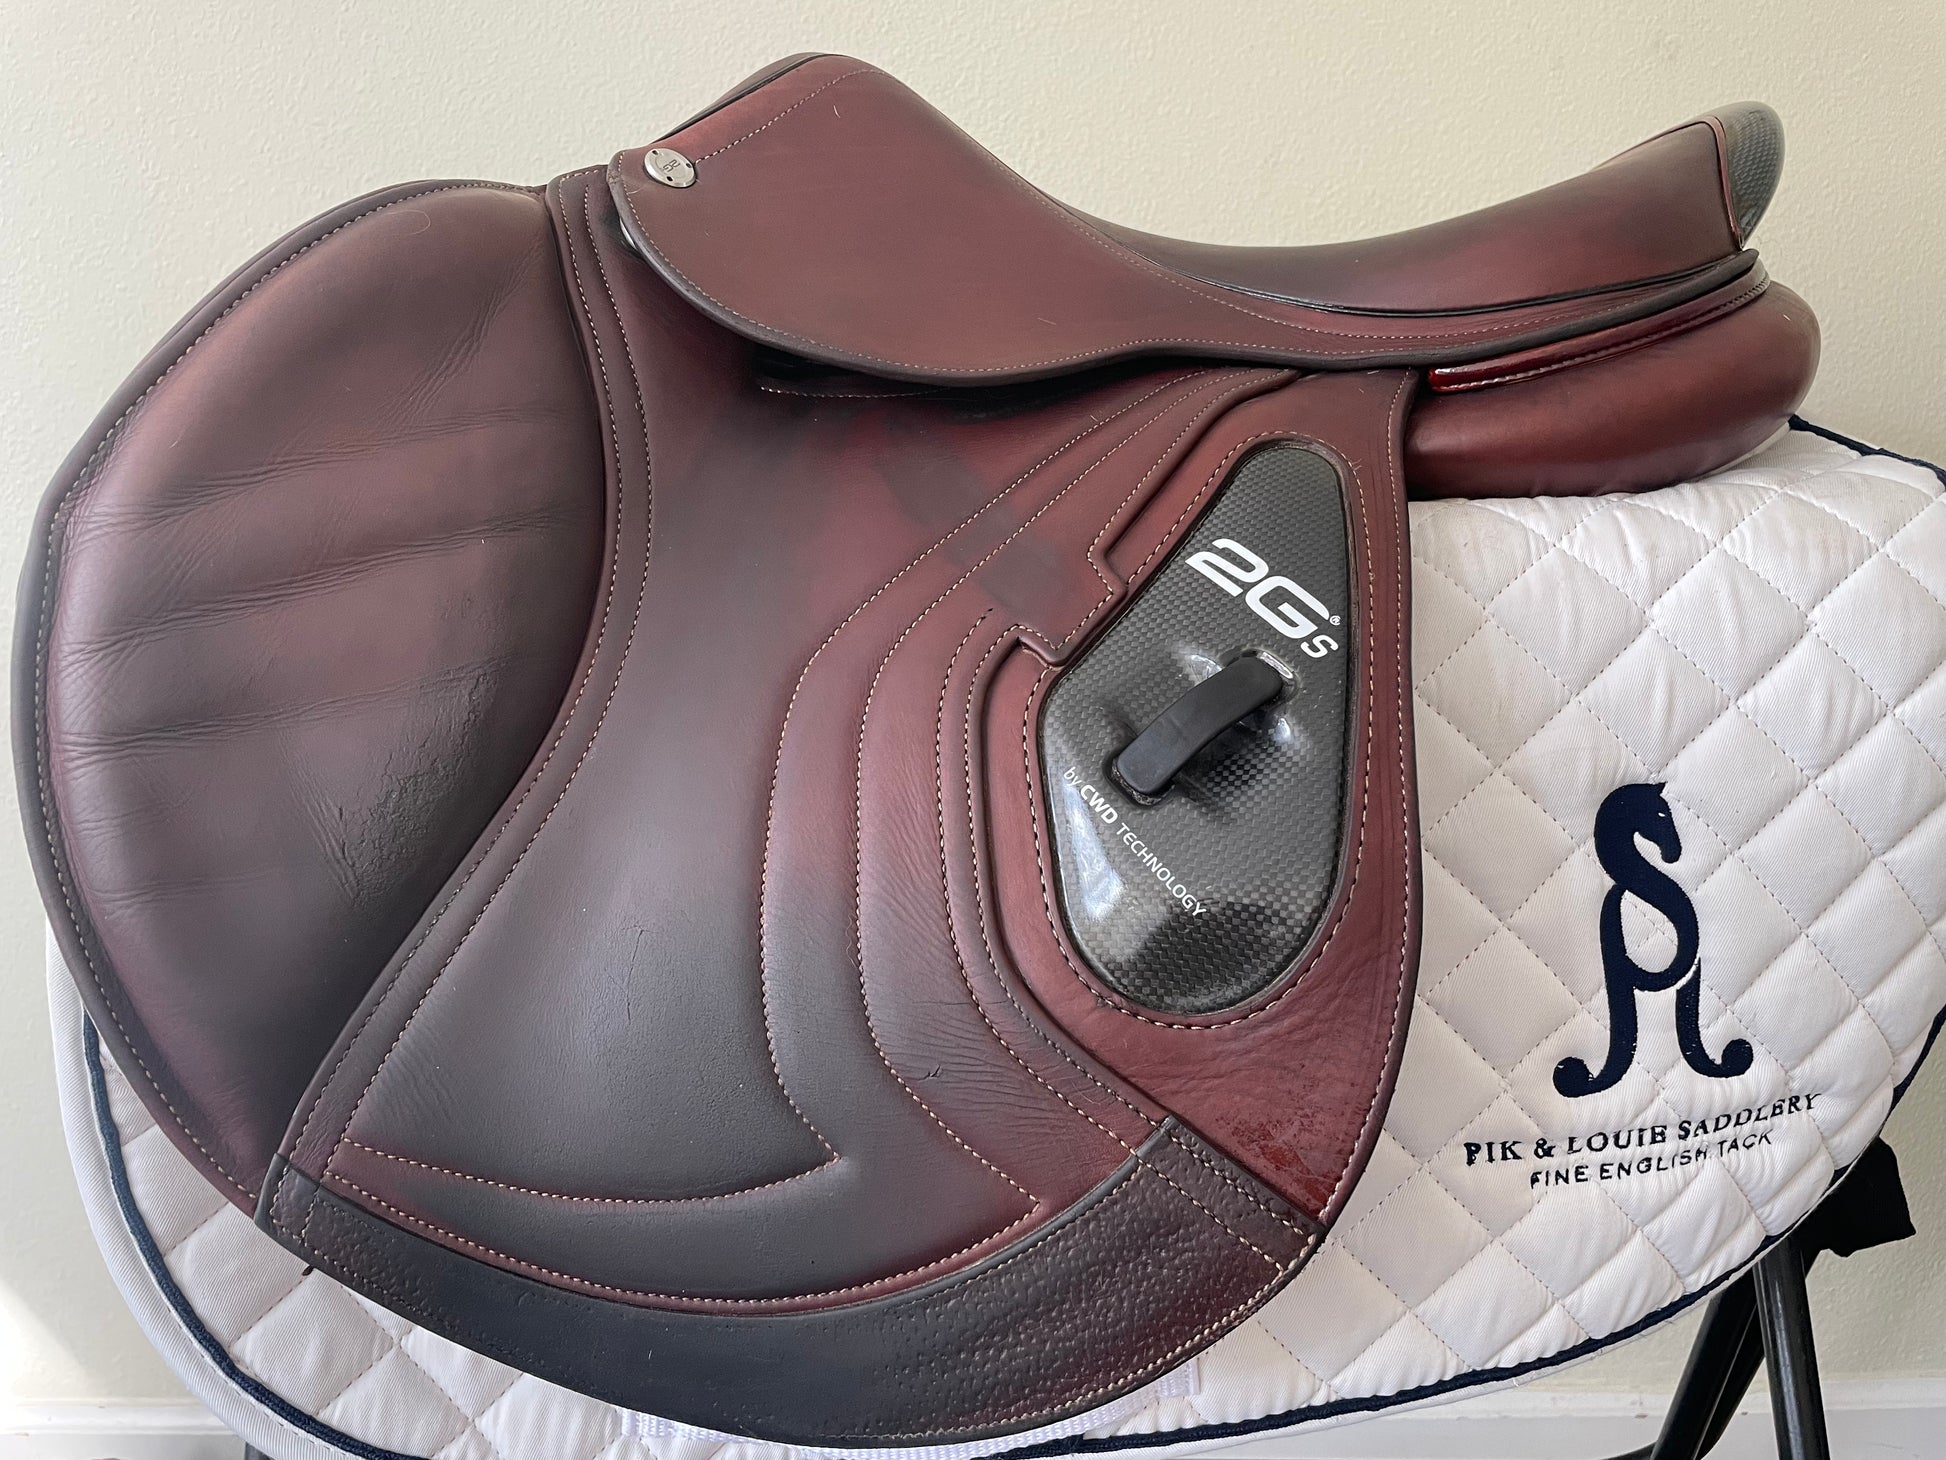 CWD Saddle in Good Used Condition.